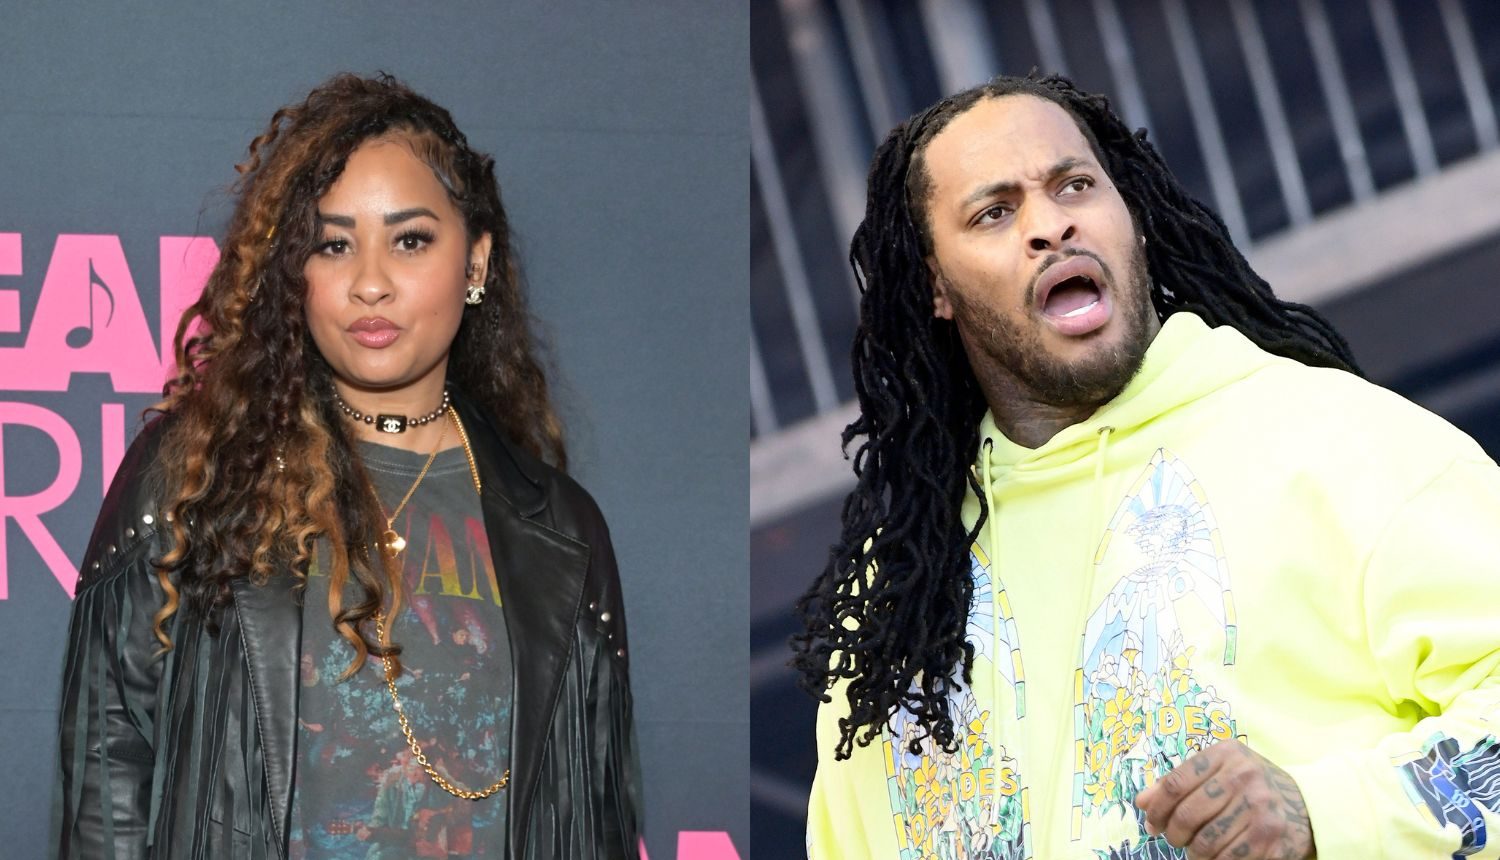 Clock It! Tammy Rivera Tells Waka Flocka To Check His “Lil Girl” Girlfriend After Internet Claims They Were Shading Each Other thumbnail